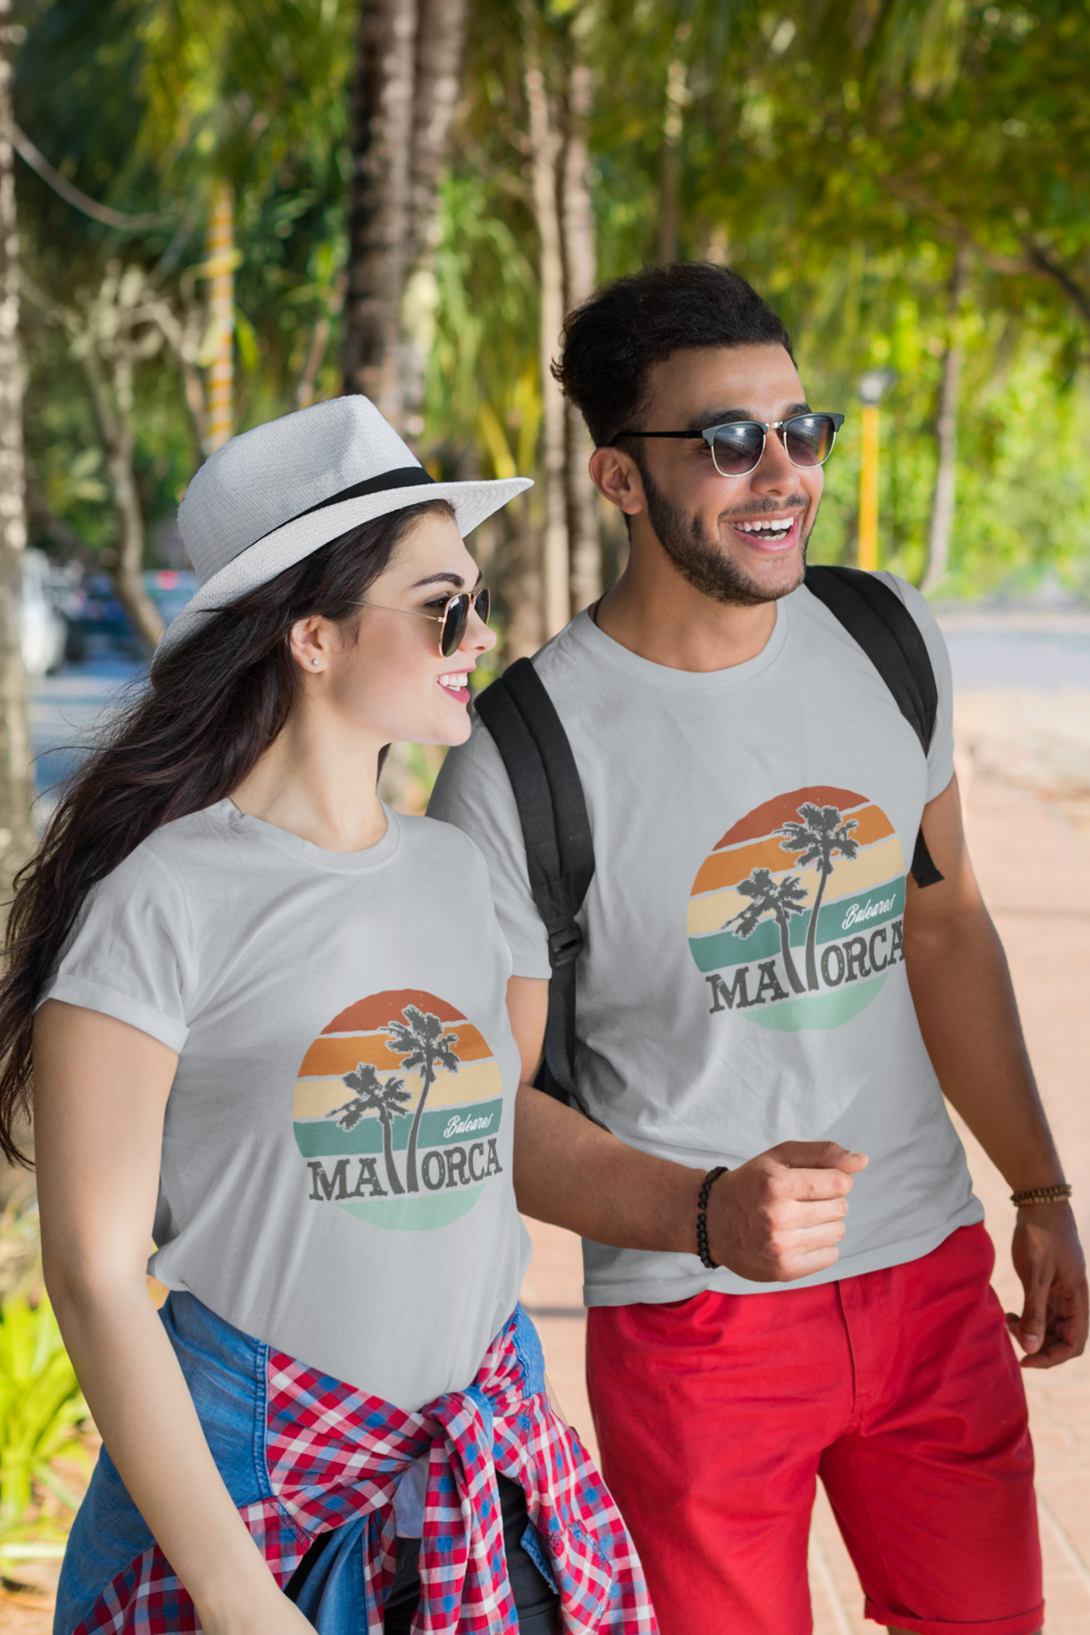 Mallorca And Palm Printed T-Shirt For Women - WowWaves - 4